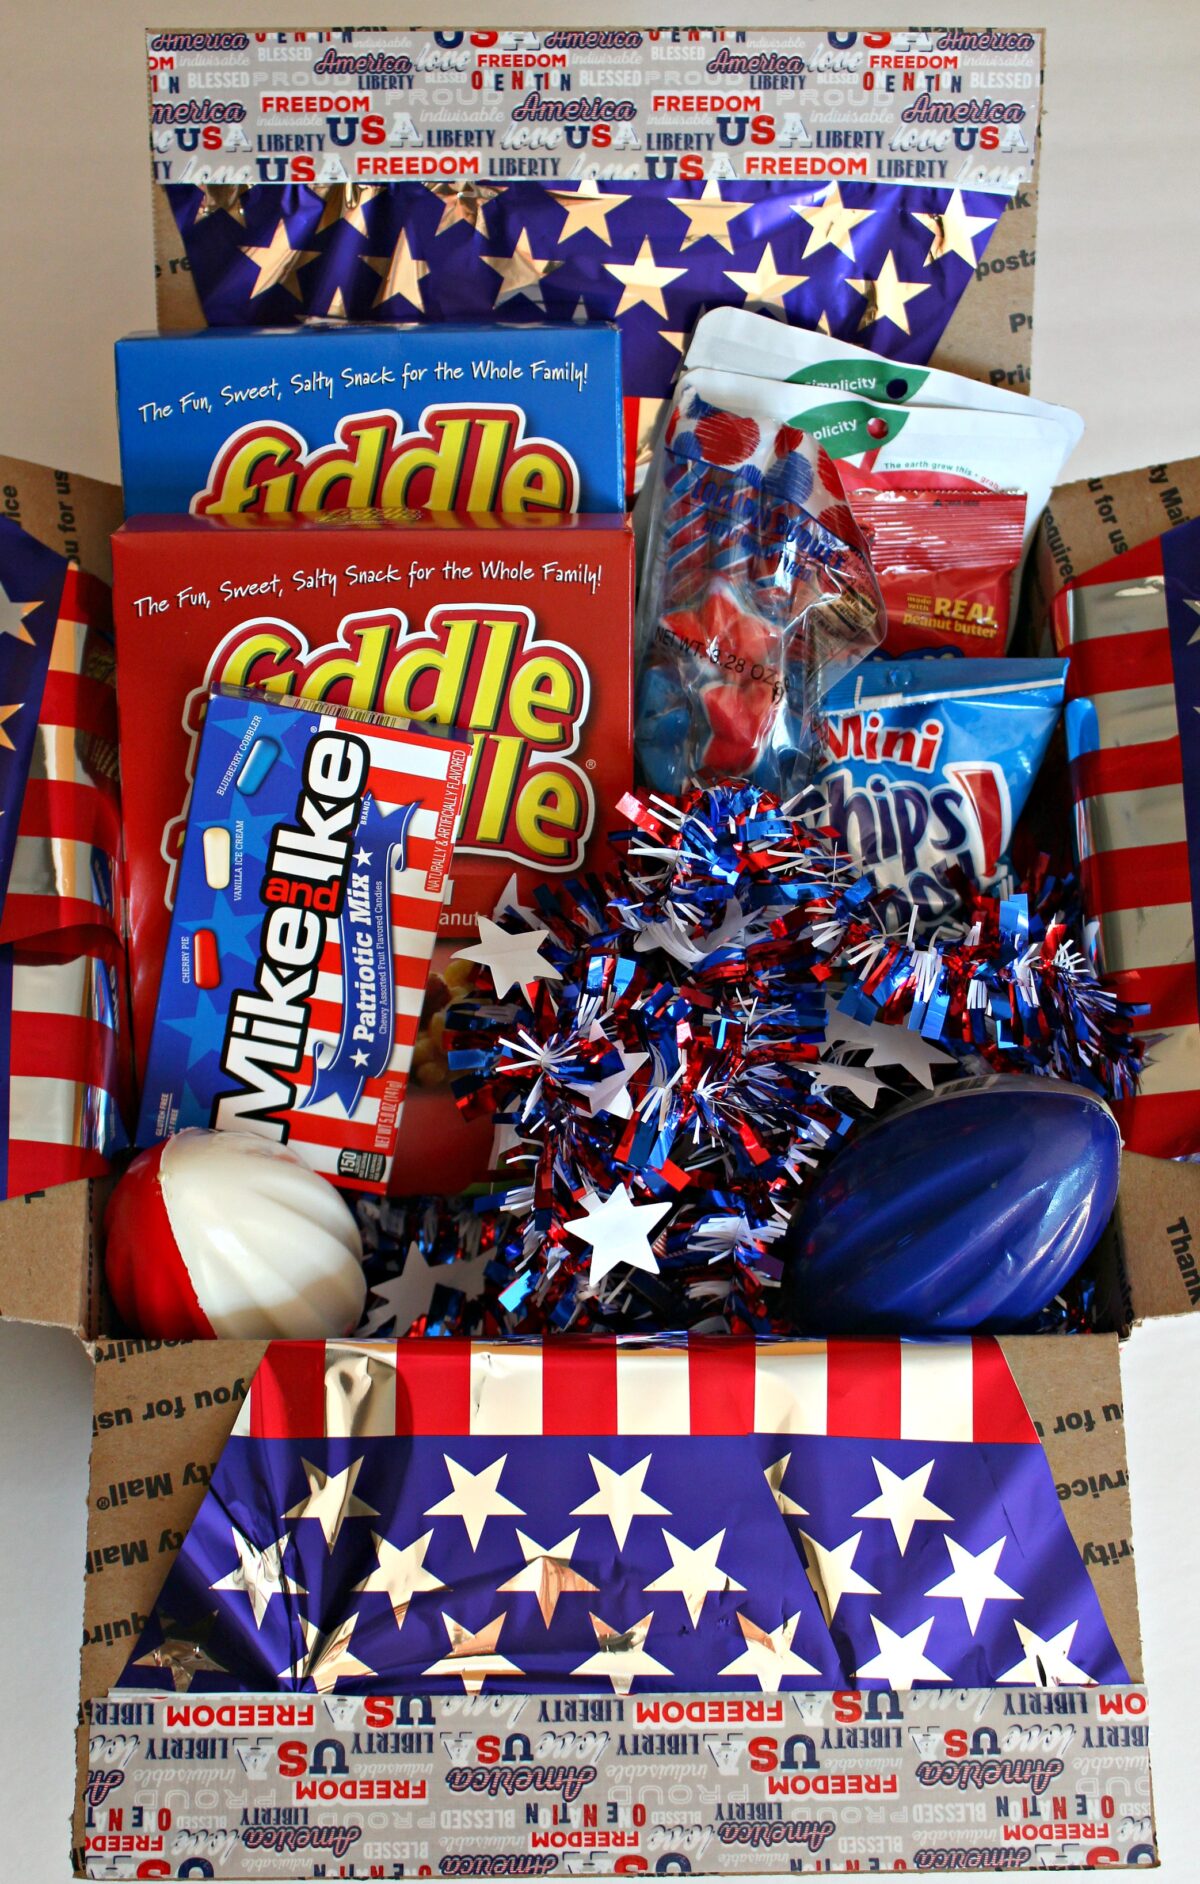 Decorated care package filled with treats packaged in red, white, and blue.